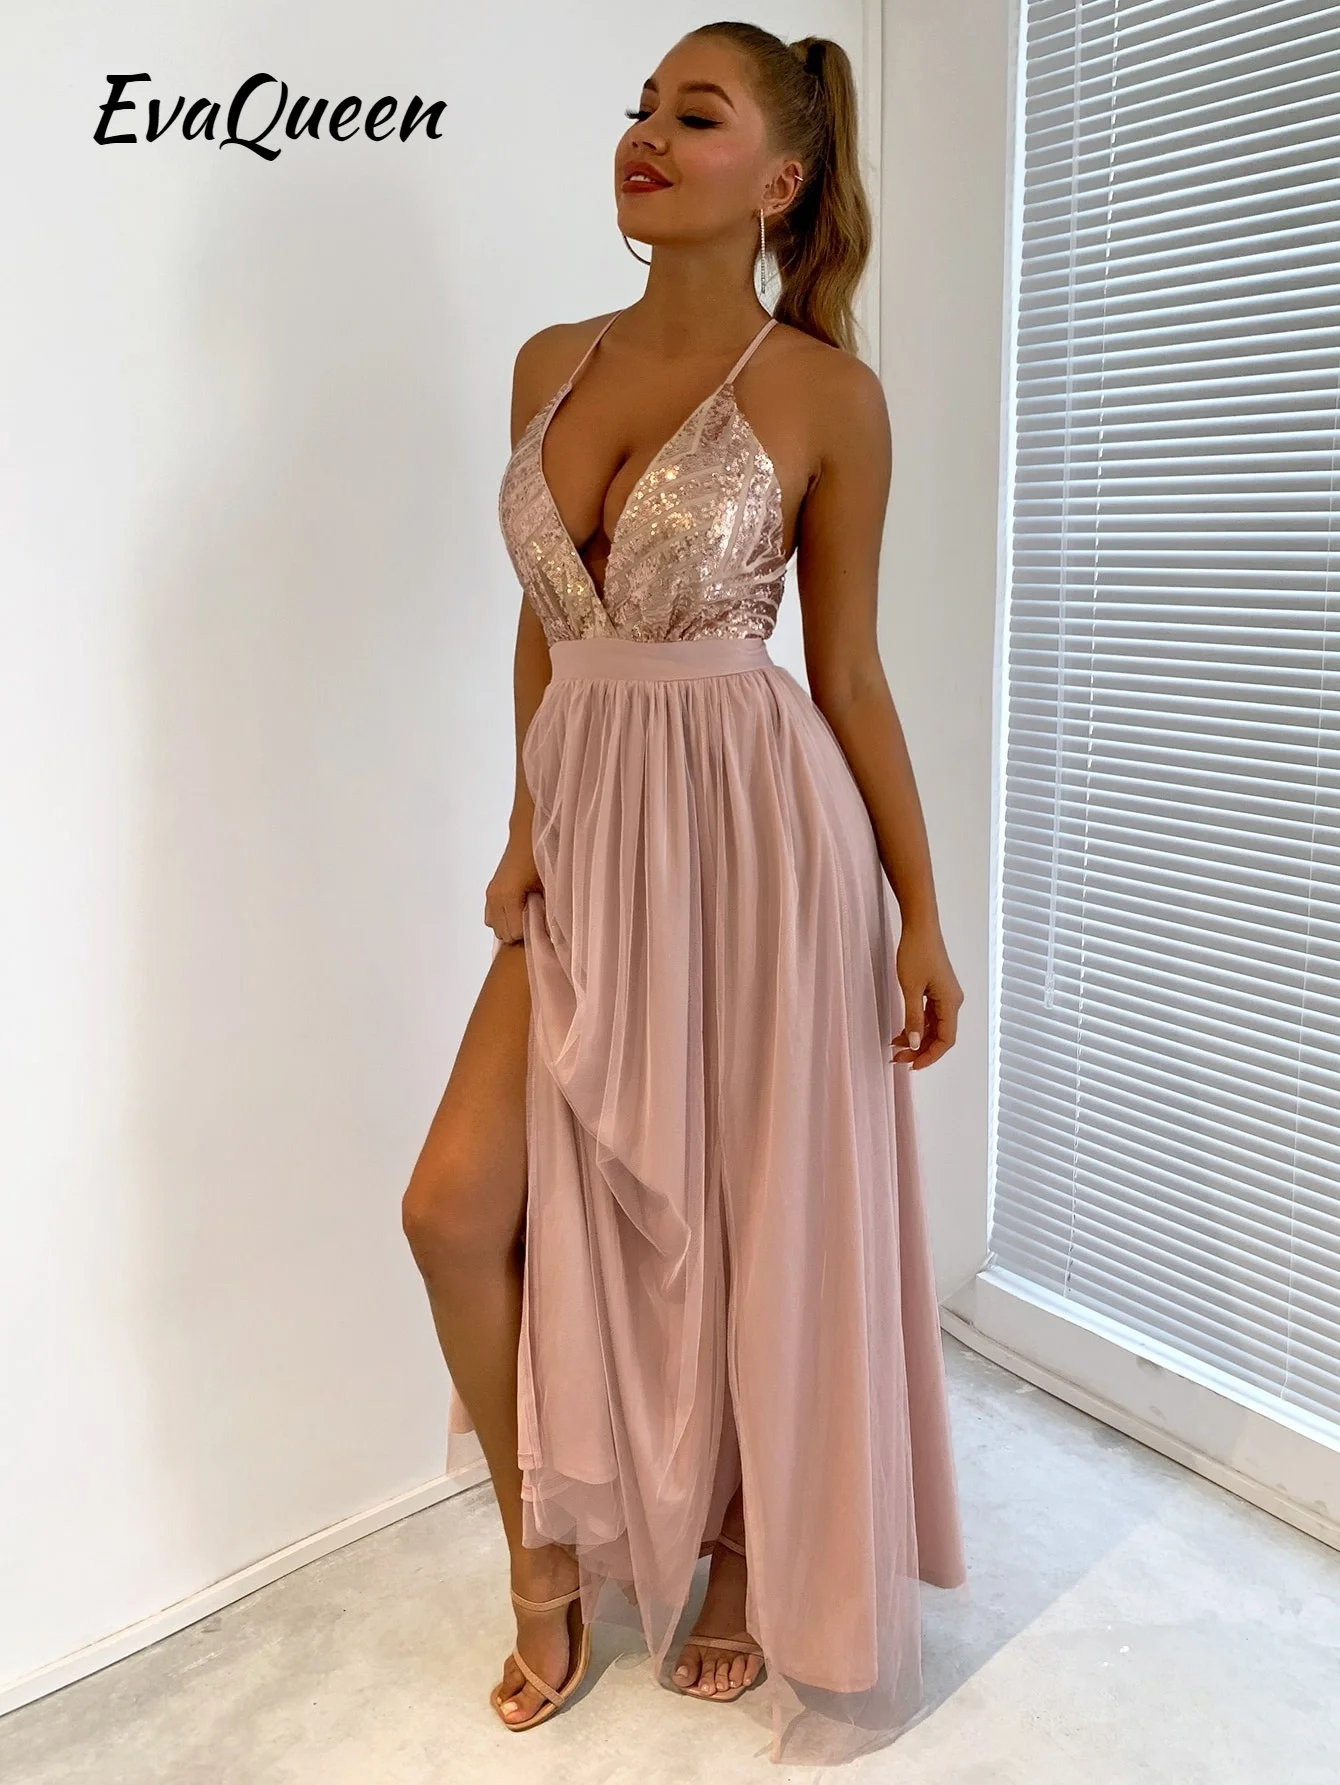 

EvaQueen Sequin Bodice Backless Mesh Cami Prom Dress